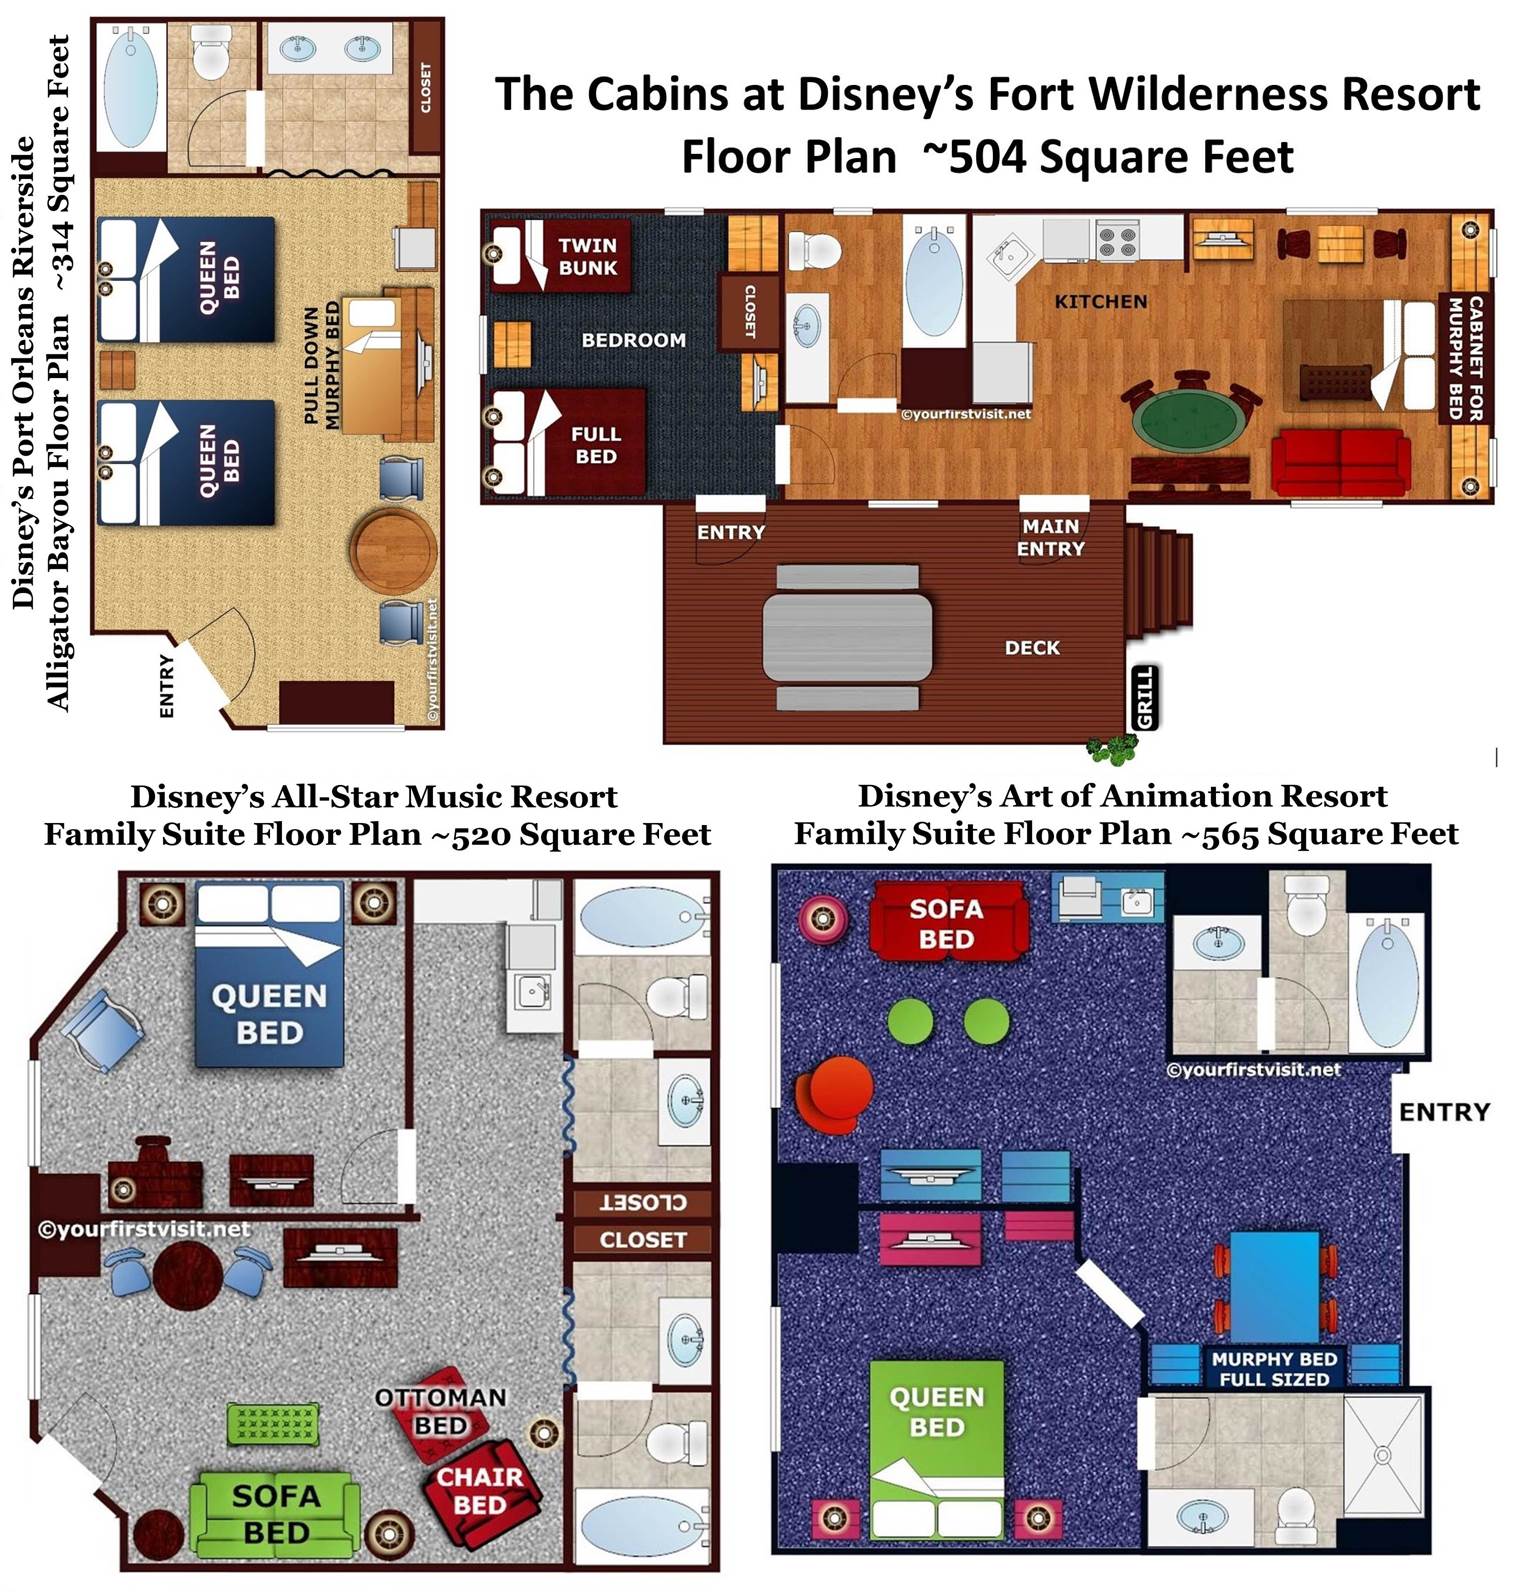 Review The Family Suites at Disney's AllStar Music Resort